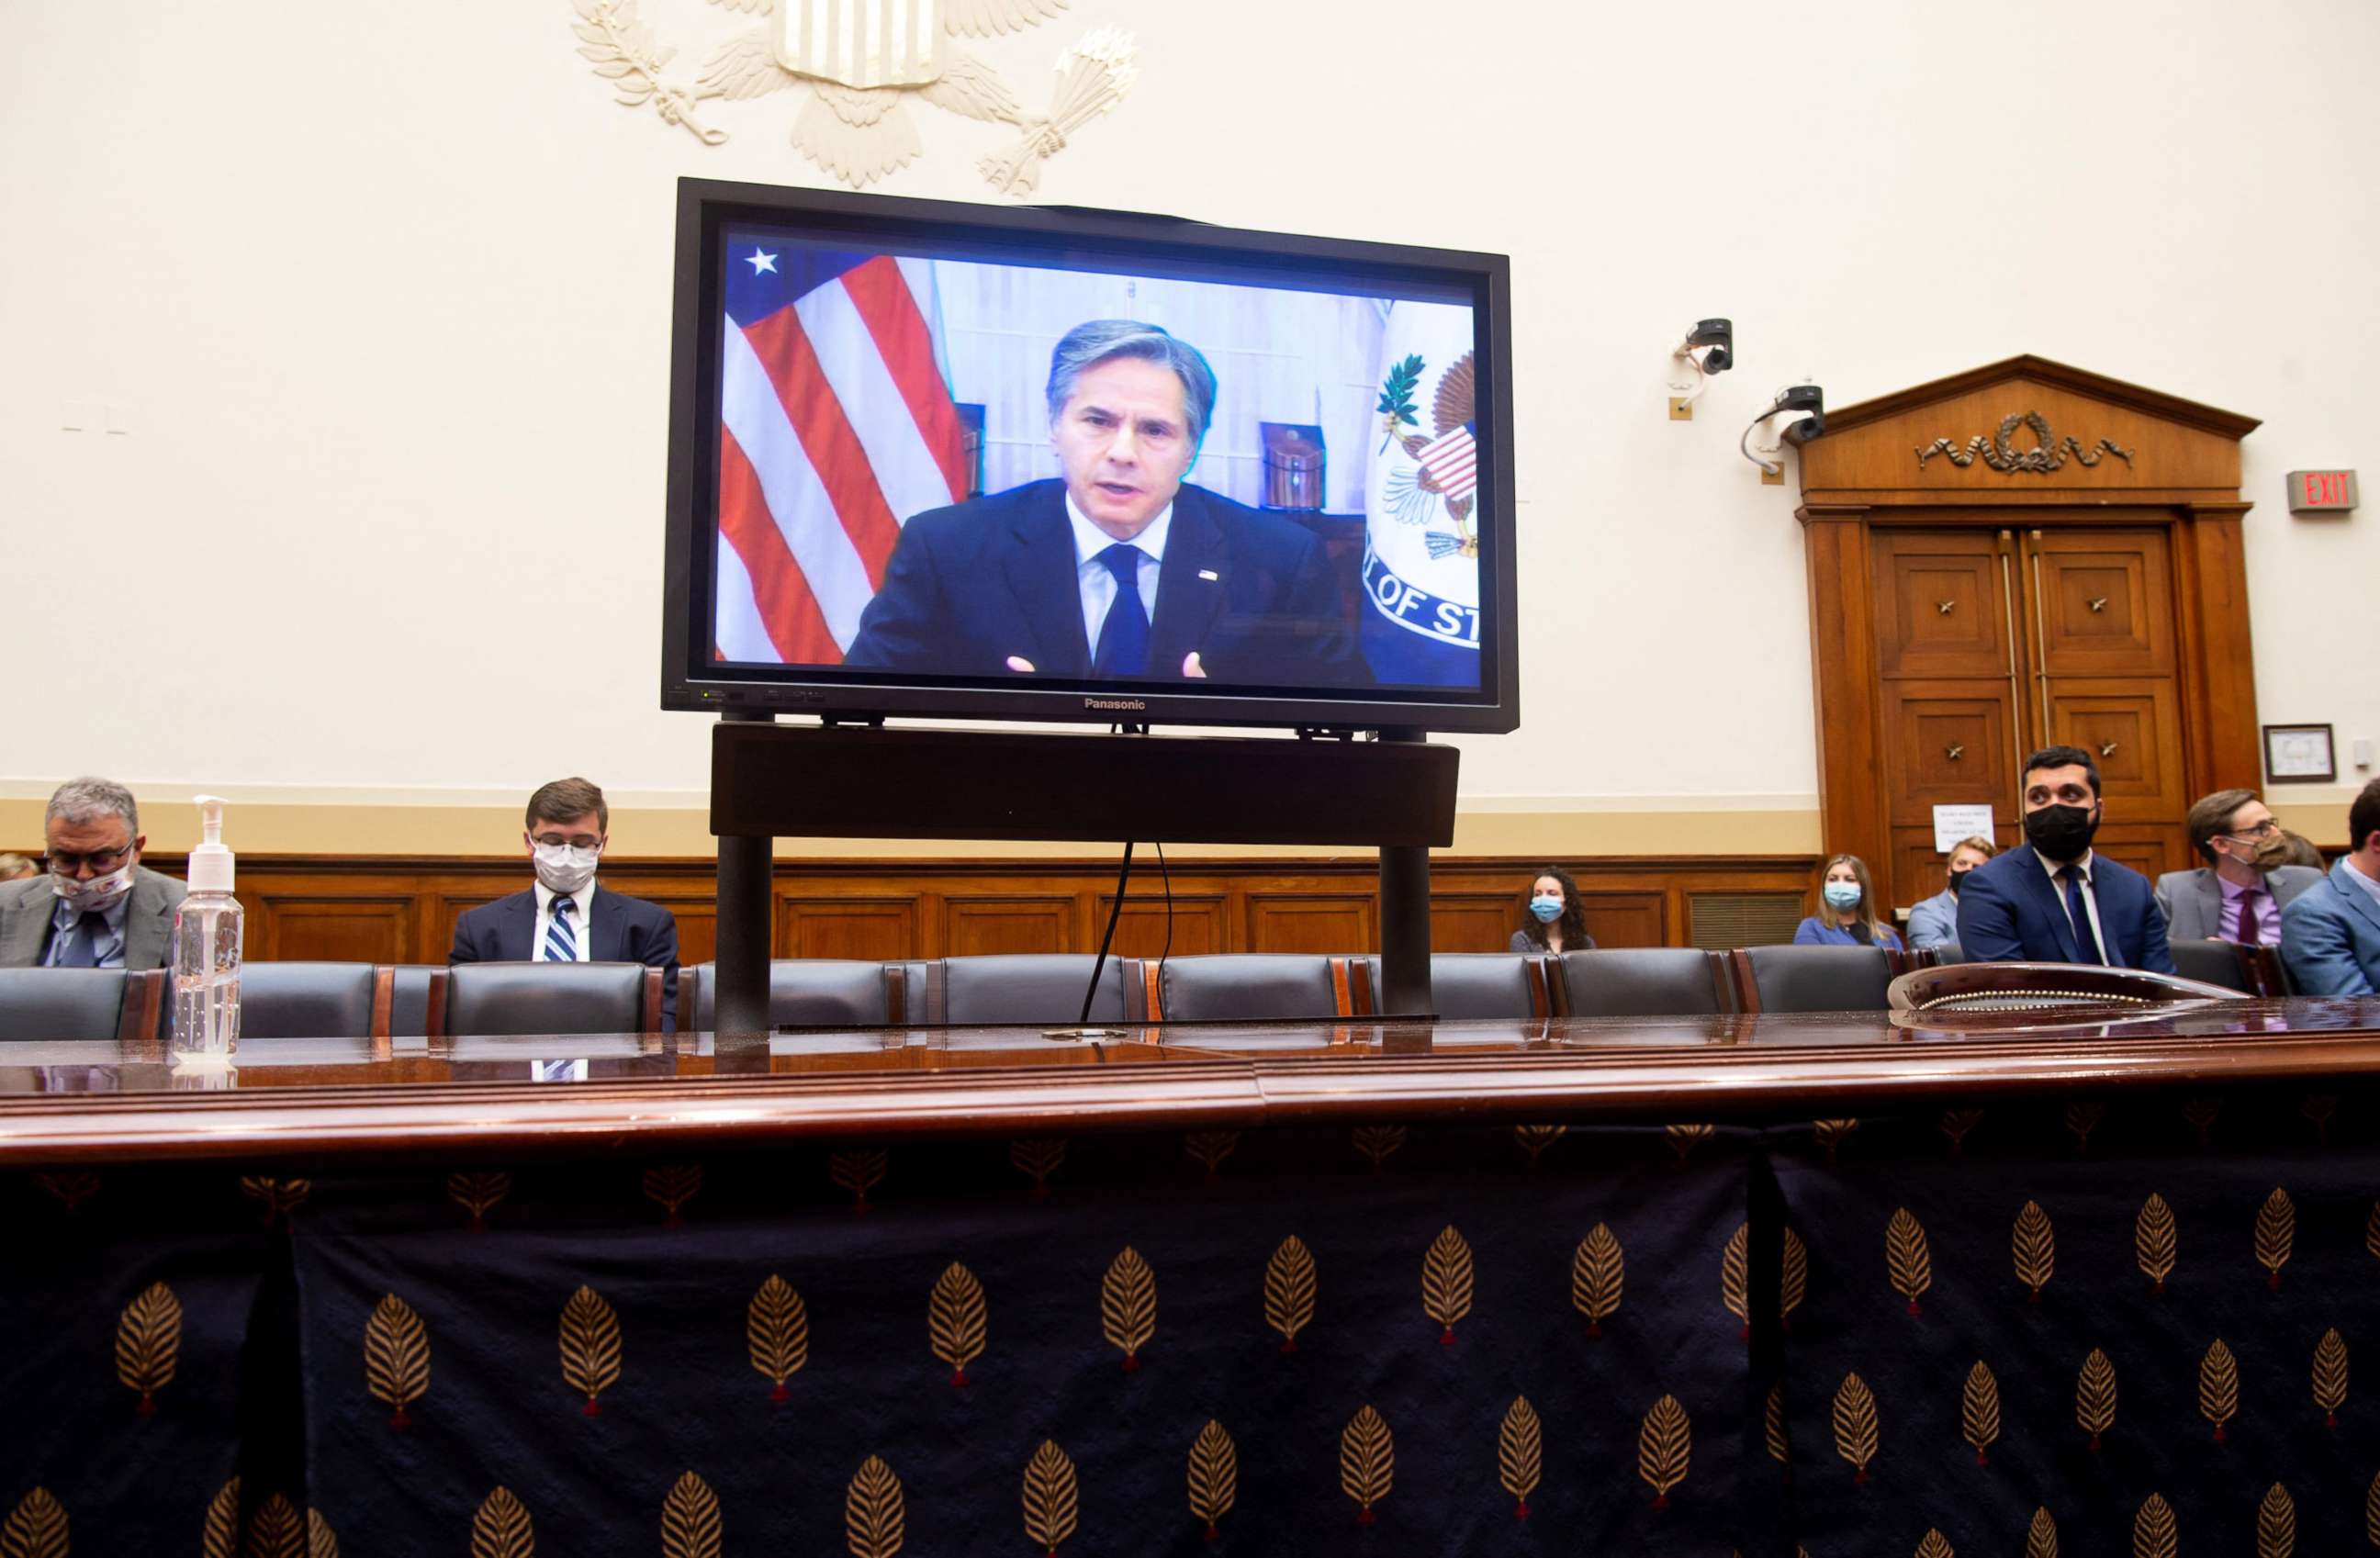 PHOTO: Secretary of State Antony Blinken appears on a television screen as he testifies virtually on the US withdrawal from Afghanistan during a House Foreign Affairs Committee hearing on Capitol Hill in Washington, D.C., Sept. 13, 2021.